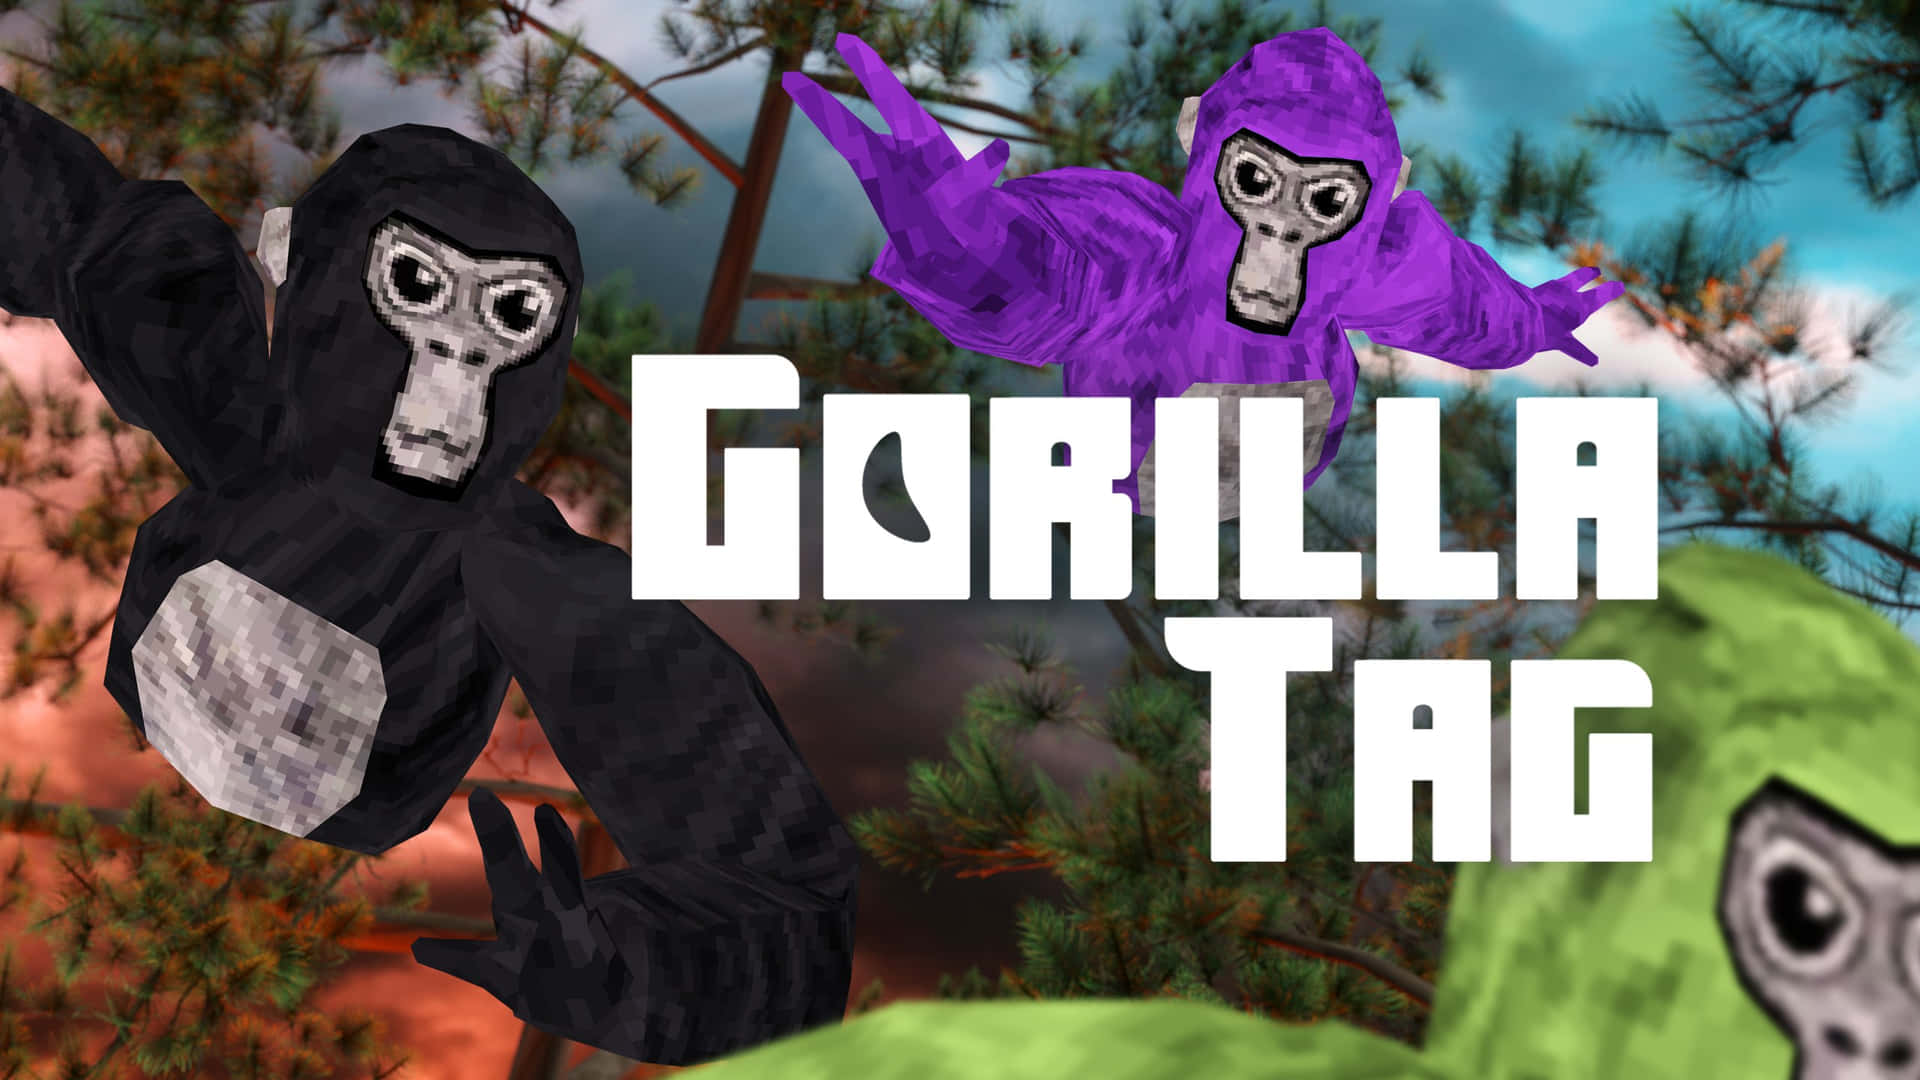 Bring Fun And Excitement To Any Environment With Gorilla Tag! Background